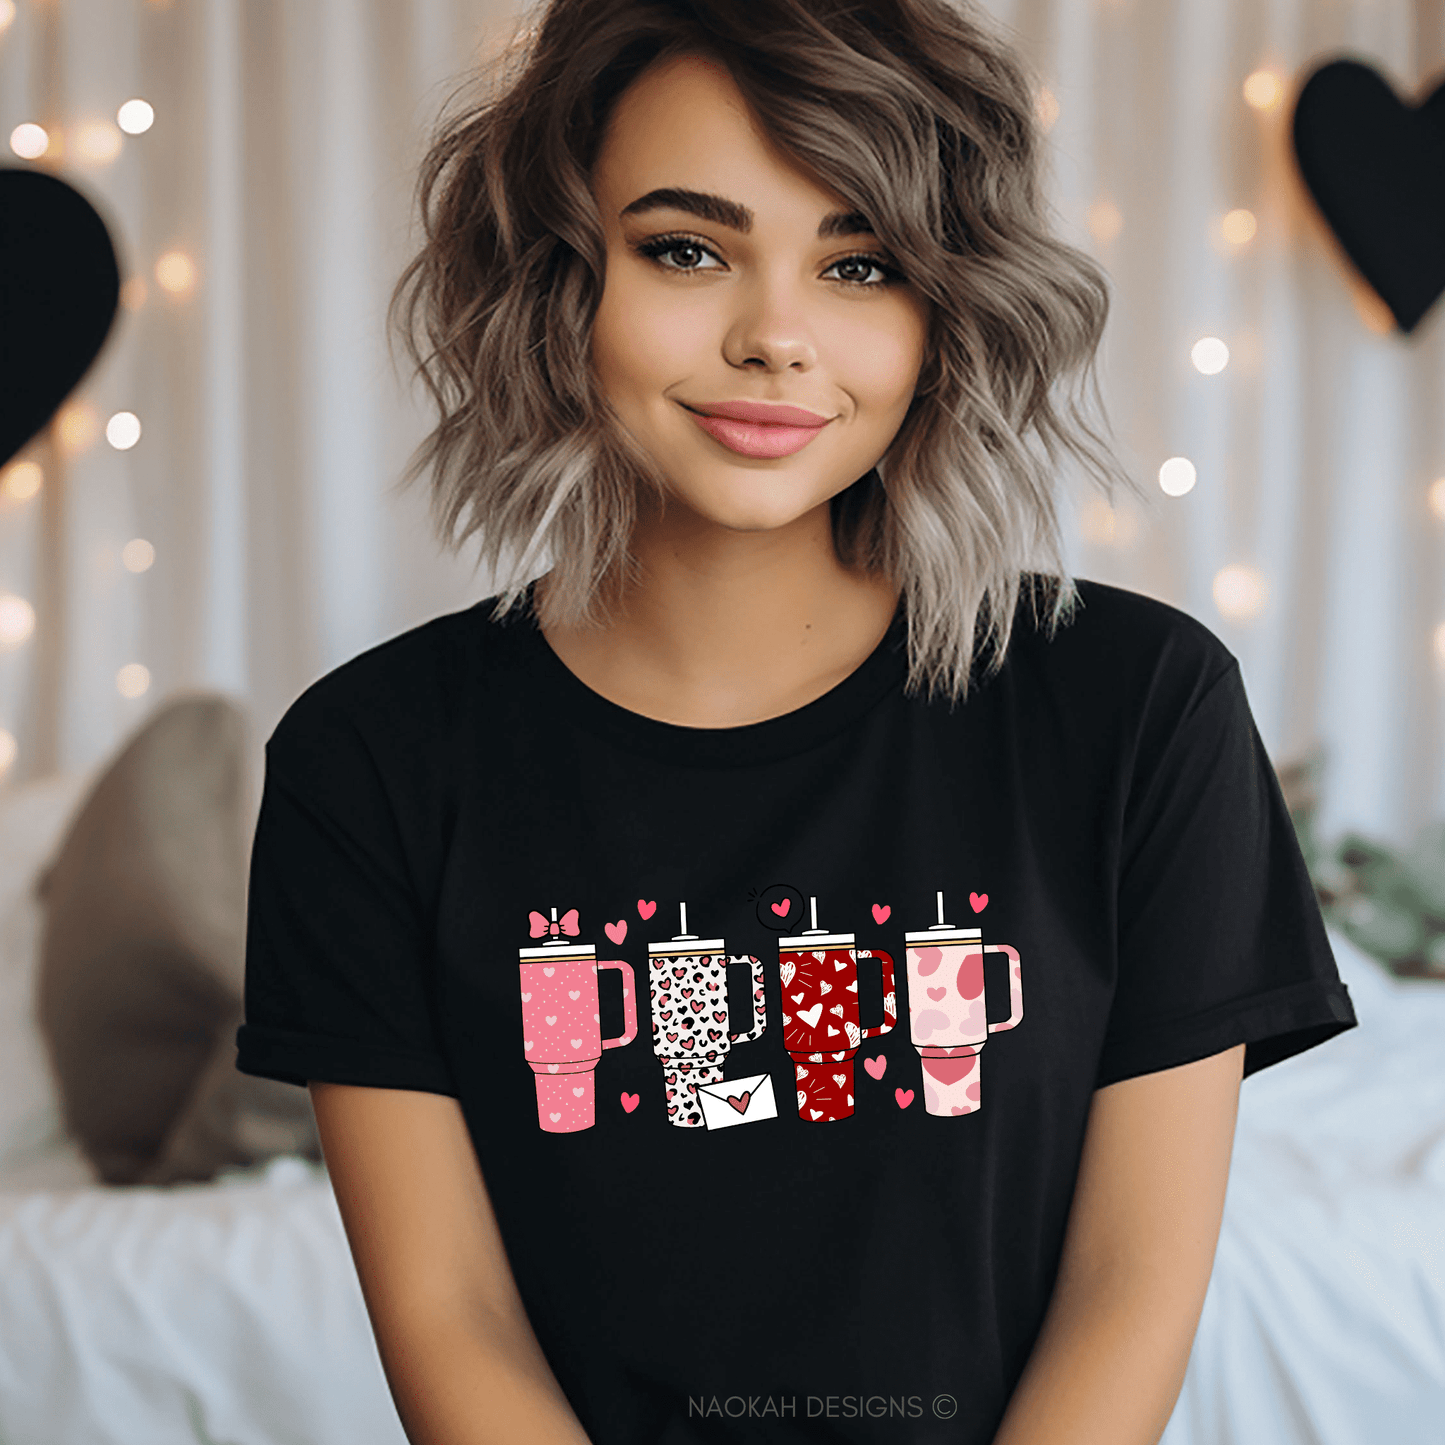 retro obsessive cup disorder valentine's day, valentines cup shirt, trendy heart valentines shirt, coffee lover shirt, pink cup tee